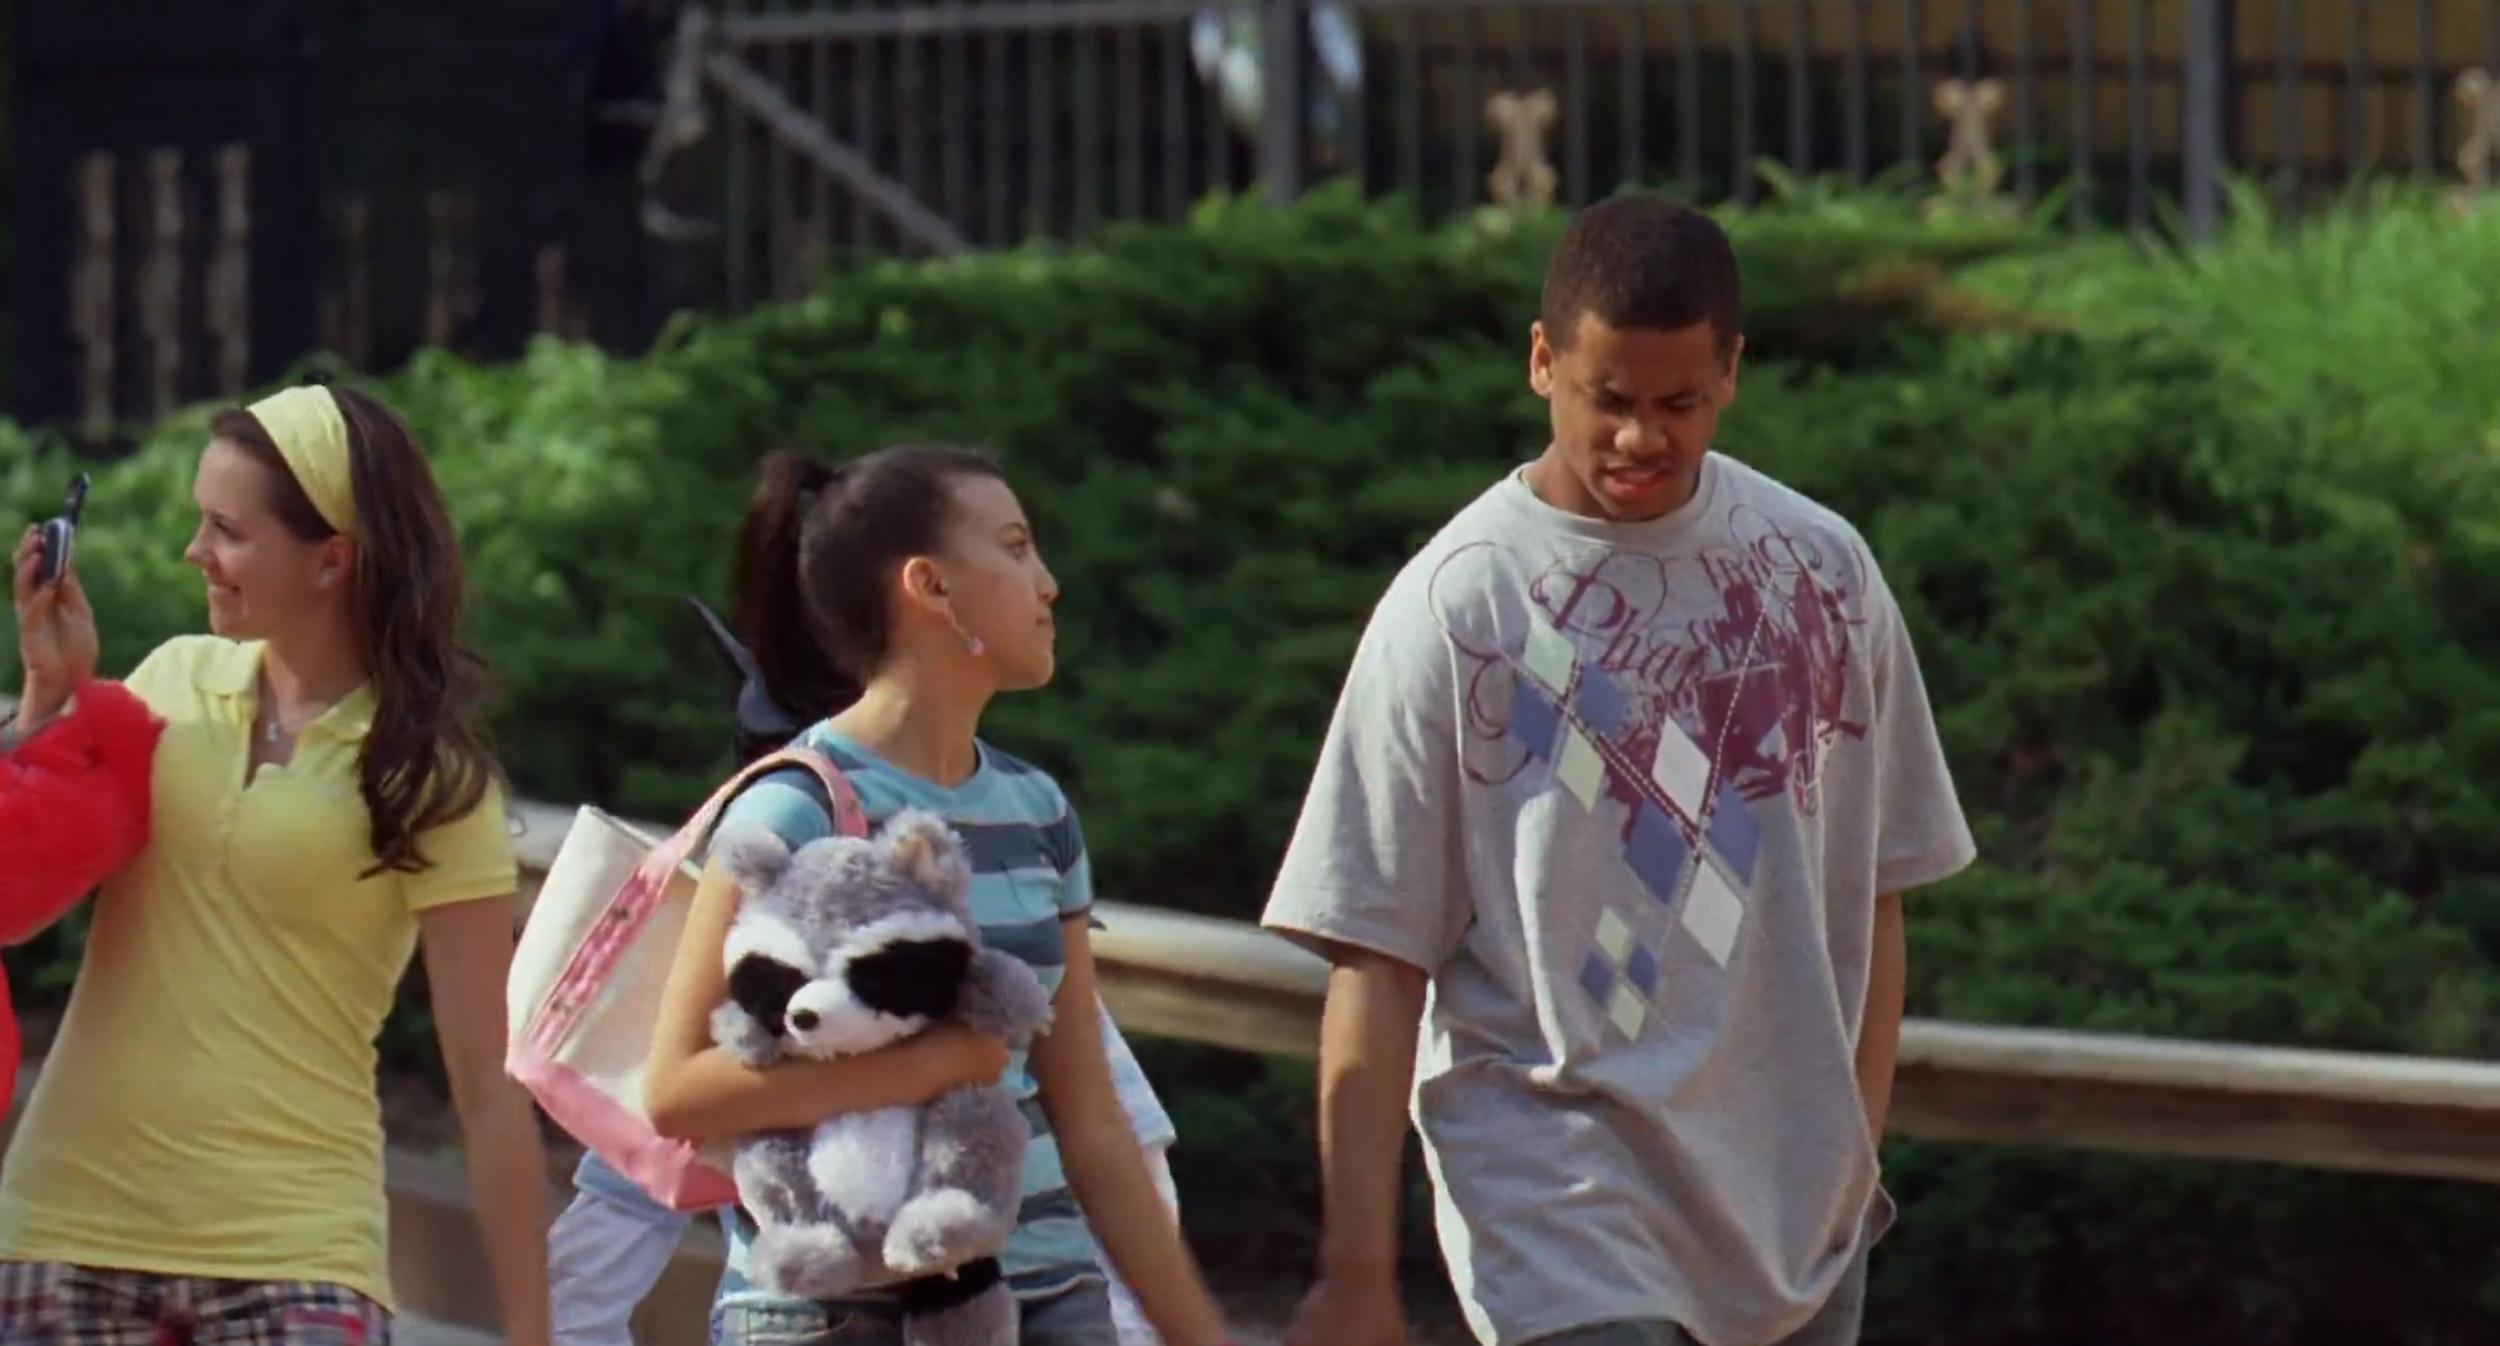   The Wire &nbsp;Season 5 Episode 3 "Not for Attribution" (performing as Tonya) dir. Scott and Joy Kecken 